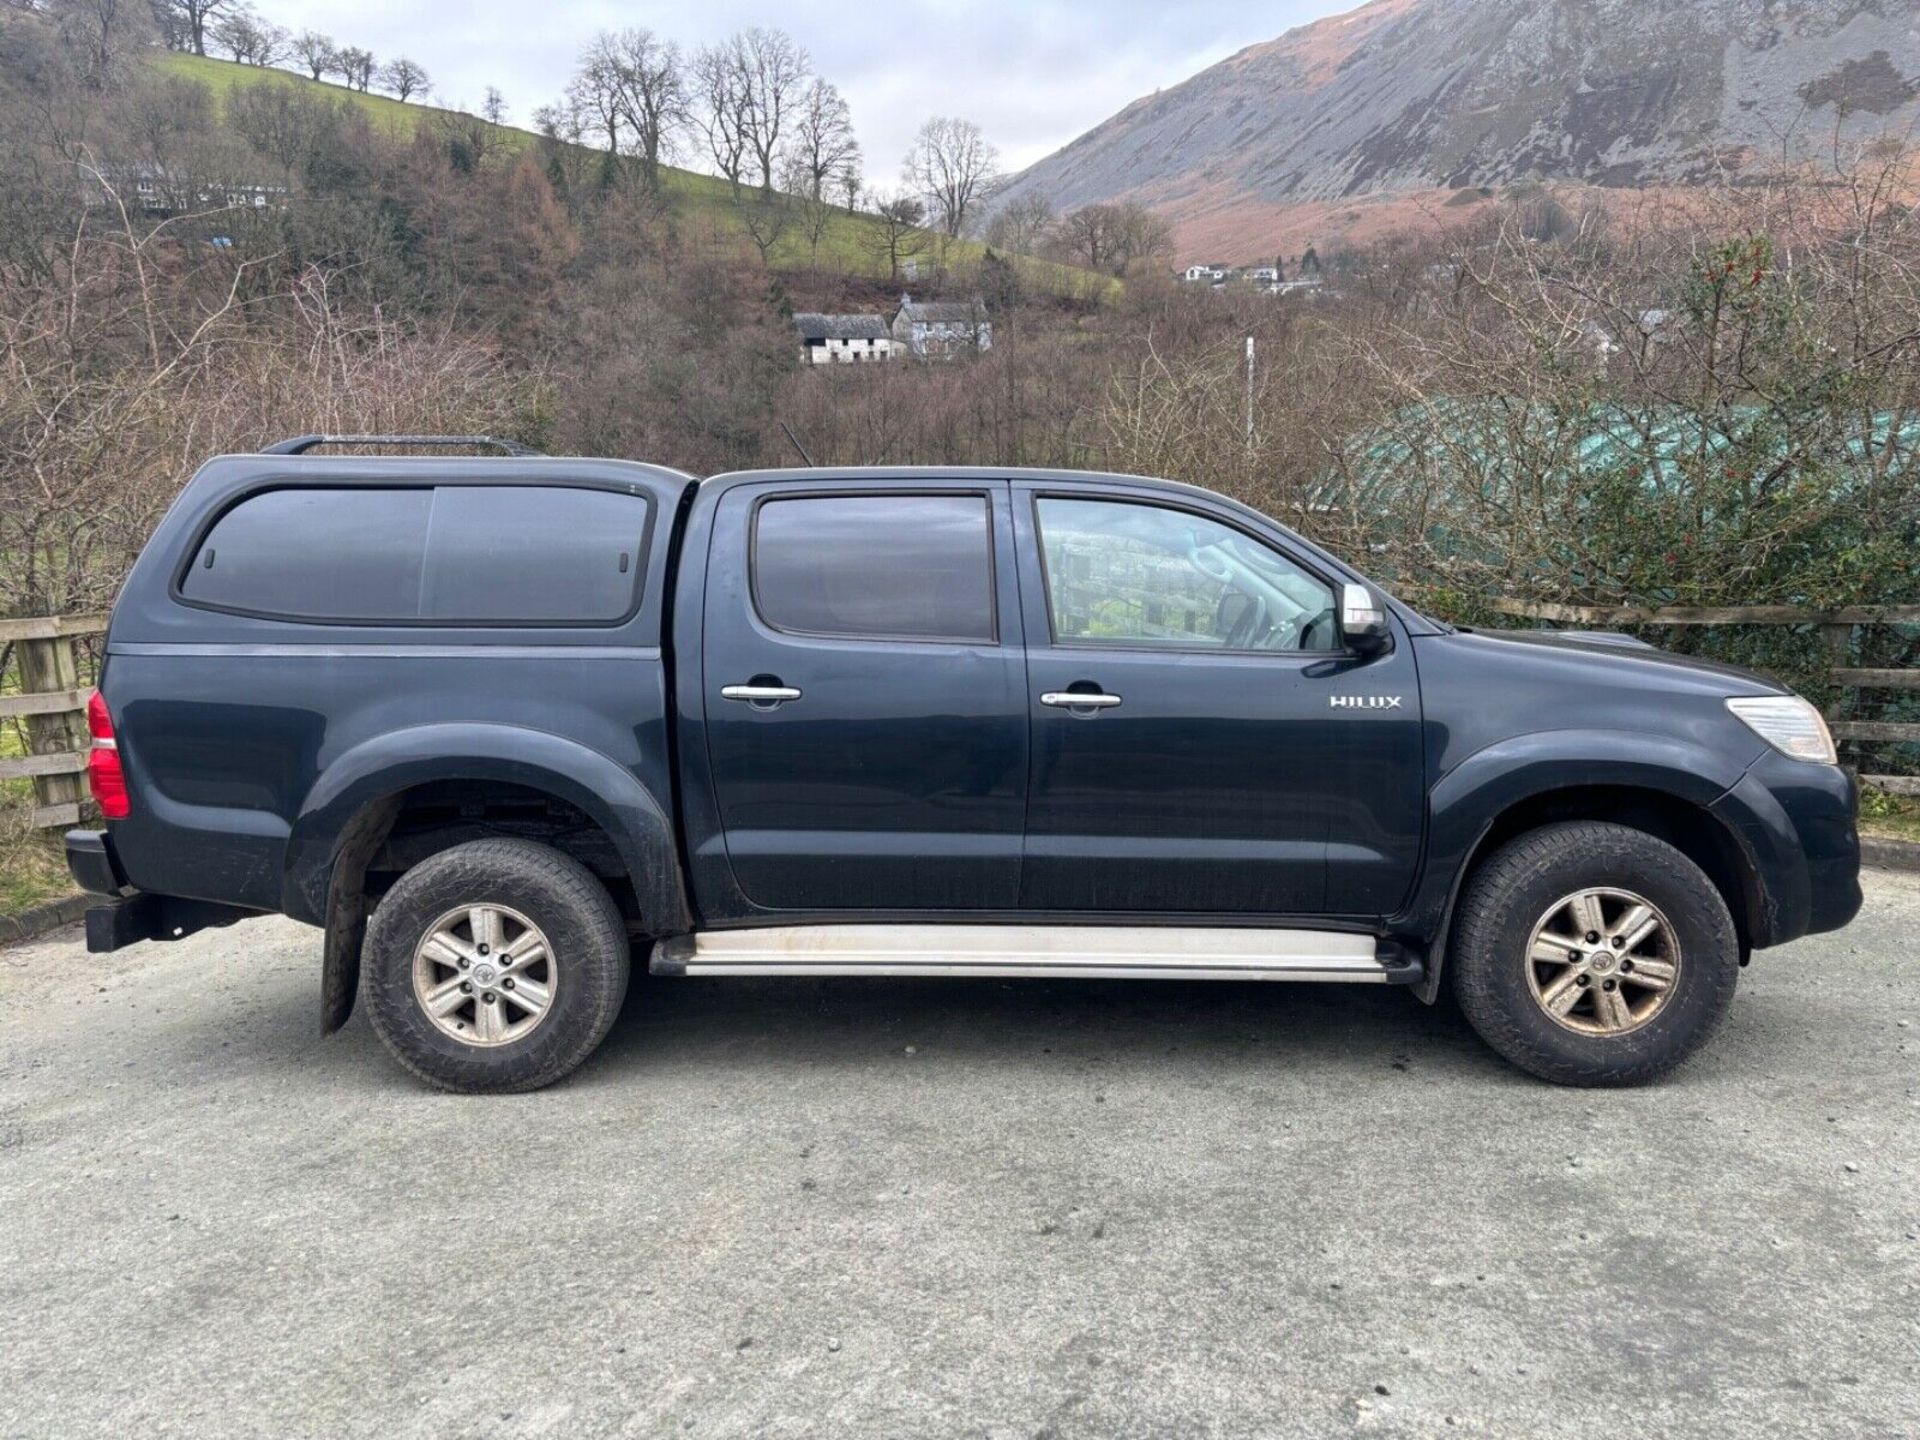 TOYOTA HILUX DOUBLE CAB PICKUP - Image 5 of 14